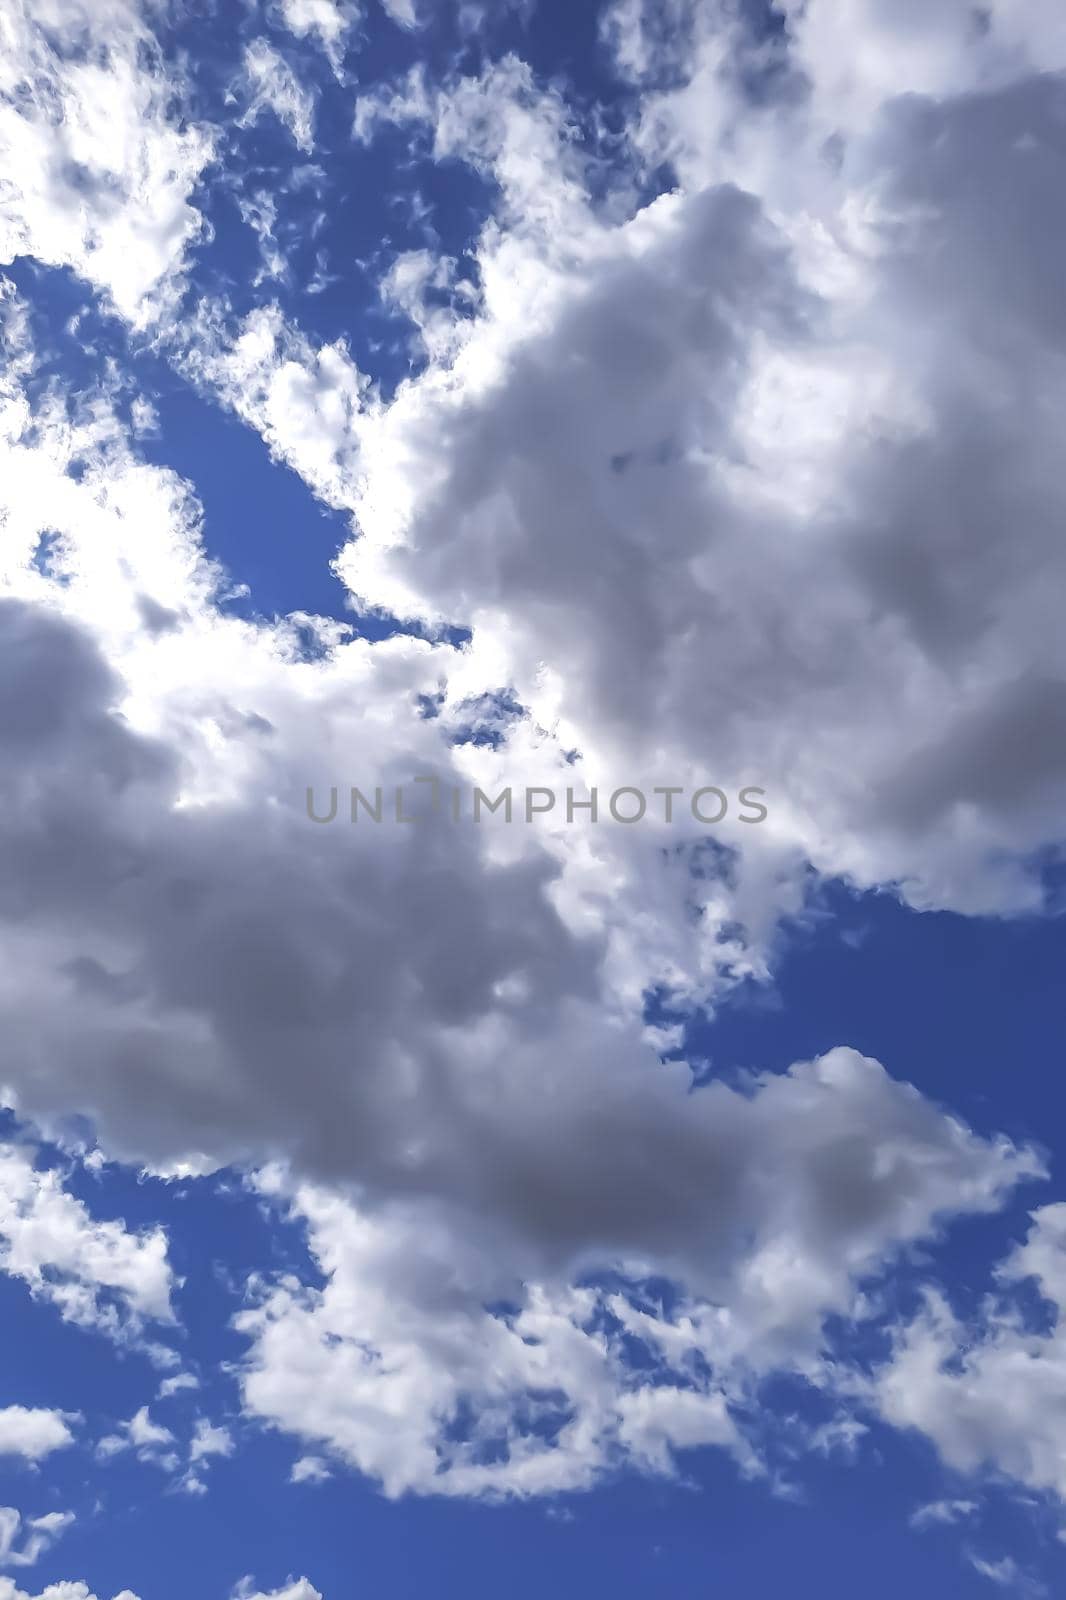 Bottom view of a blue sky with white clouds